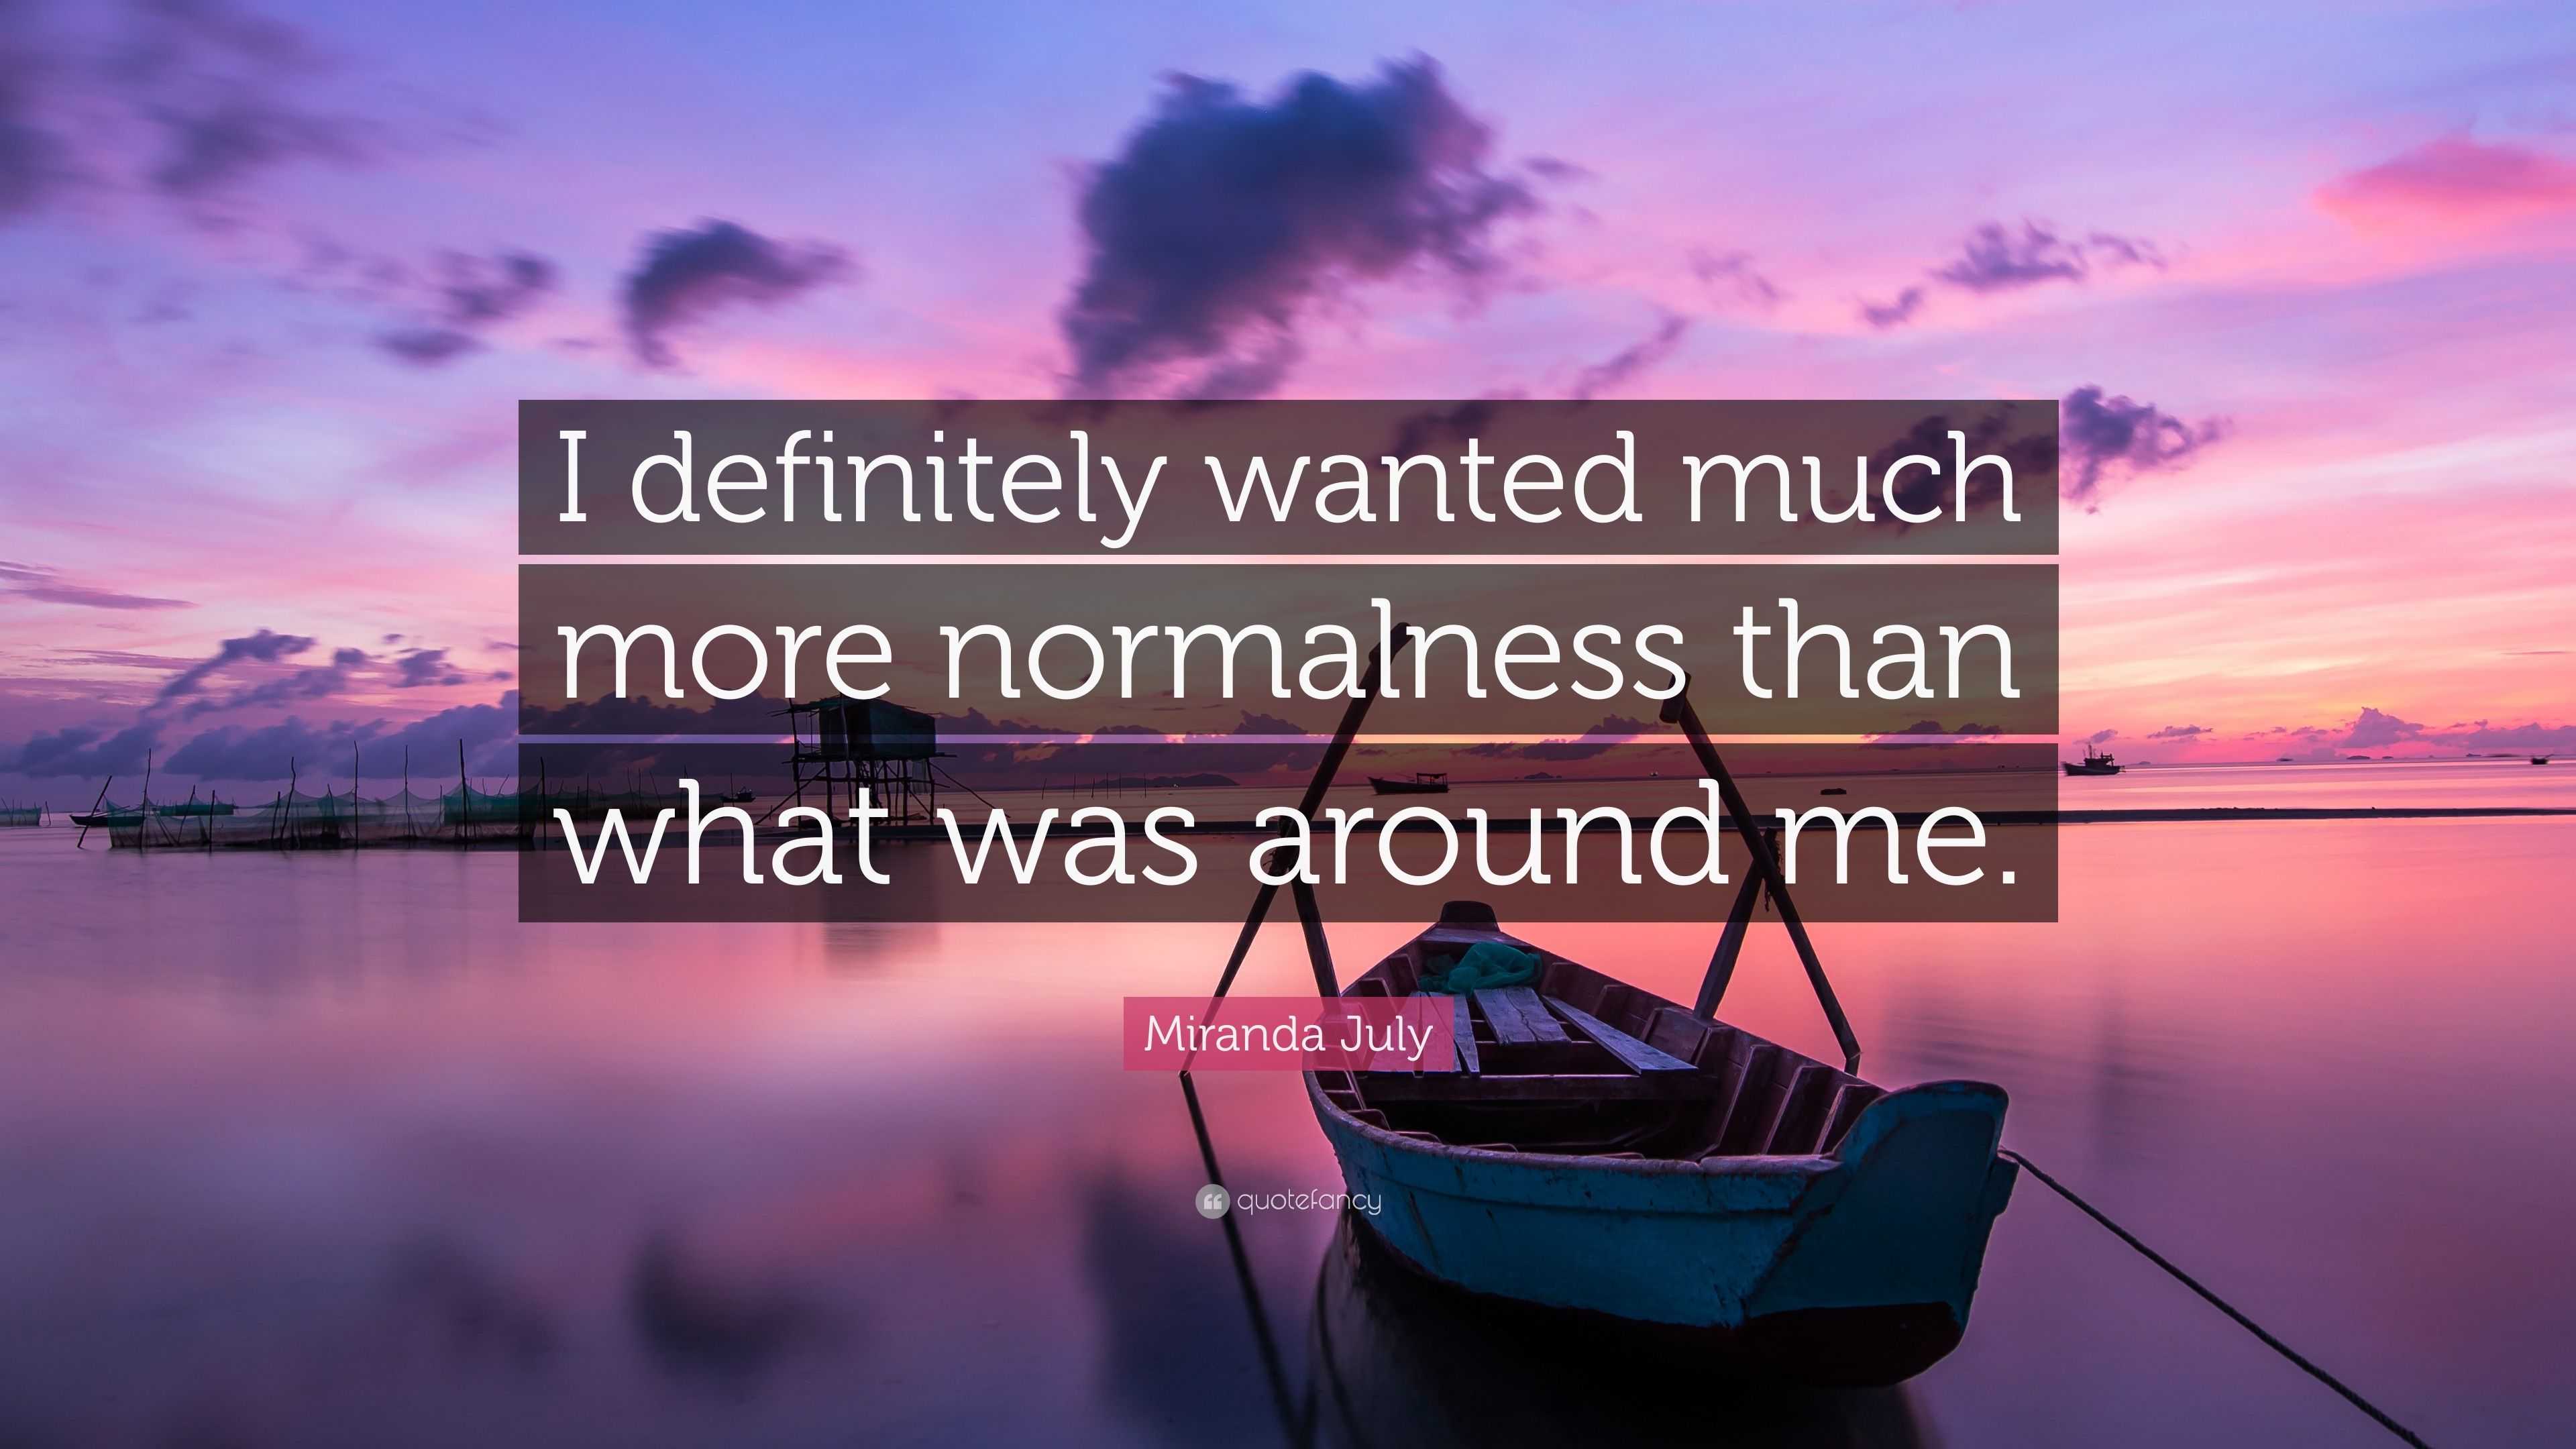 Miranda July Quote: “I definitely wanted much more normalness than what ...